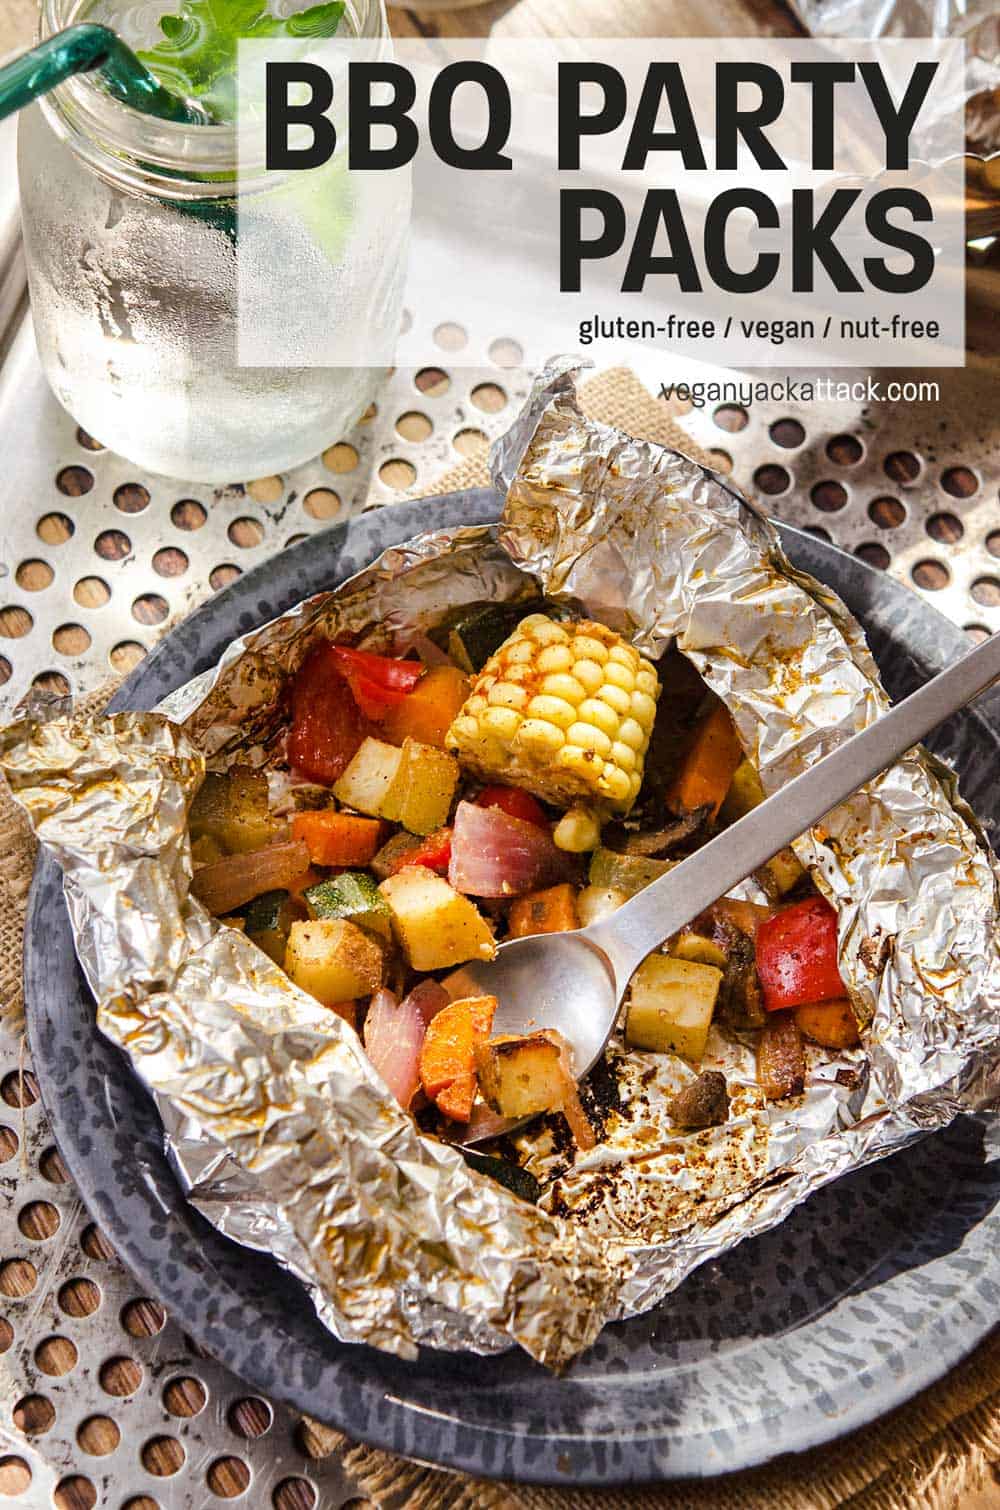 Foil, grilled, BBQ Party Pack opened up with veggies showing, being eaten with a spork